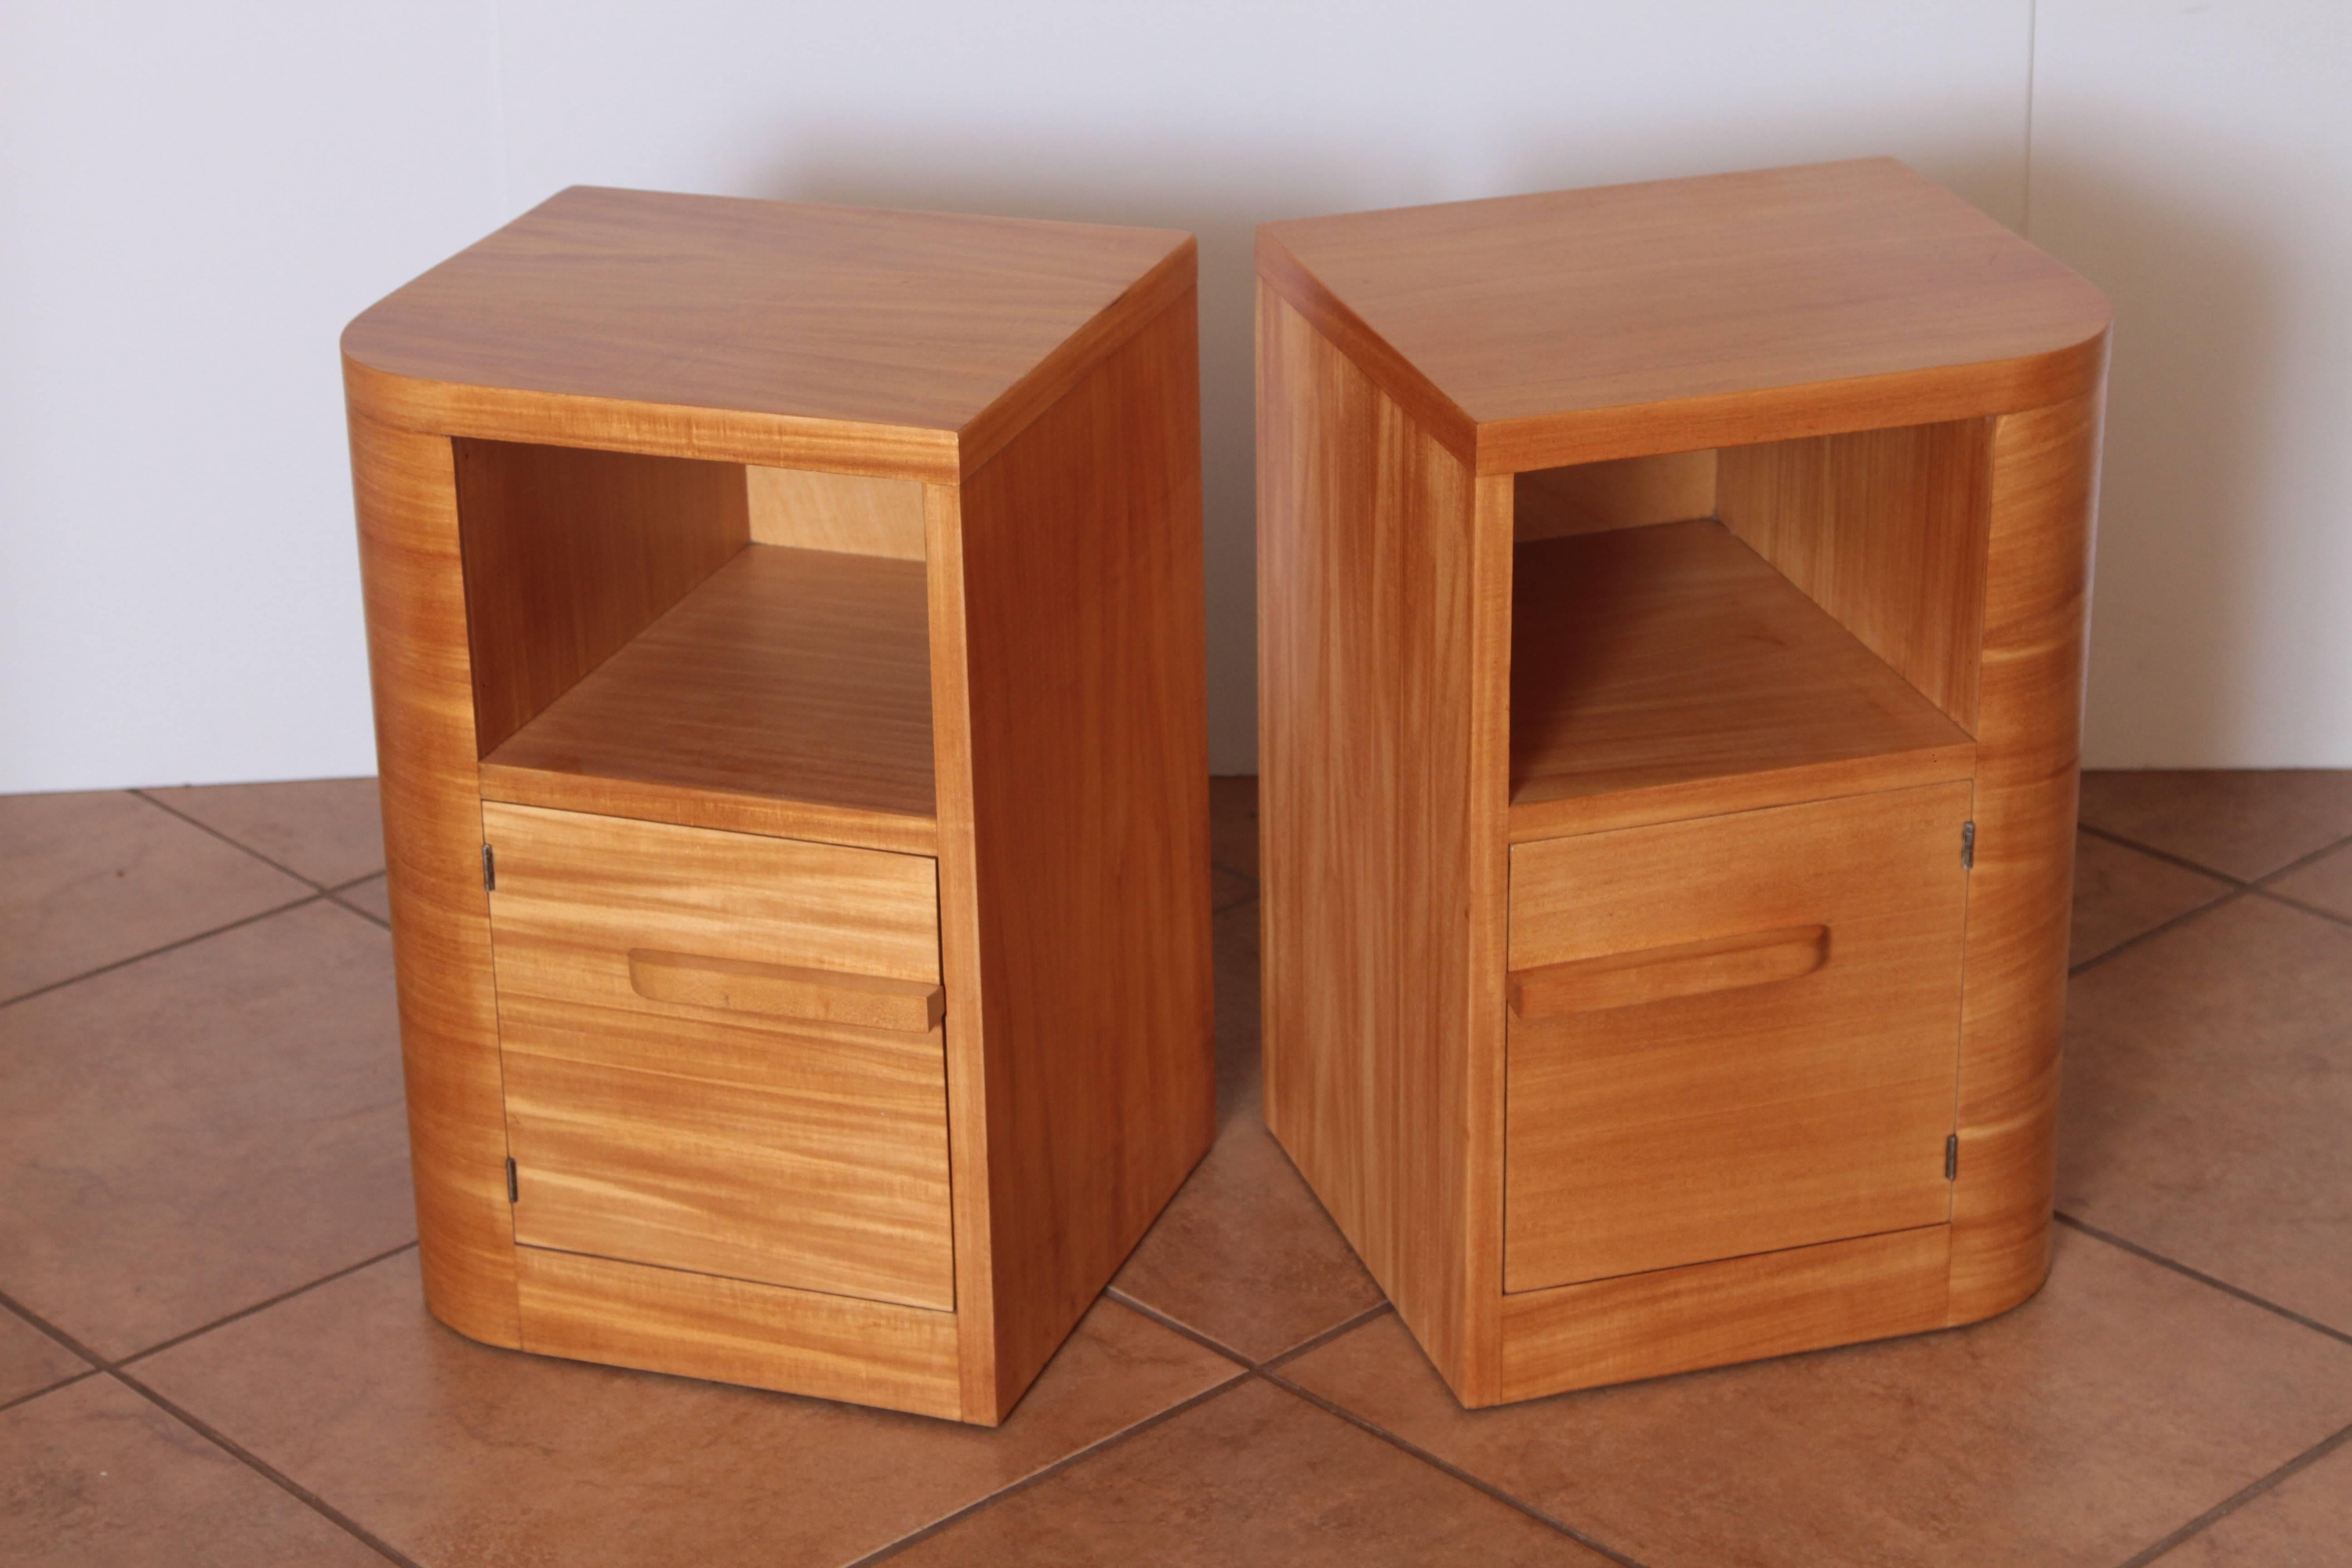 Art Deco Modern Age Nightstands / End Tables, Manner of Donald Deskey, Pair 3